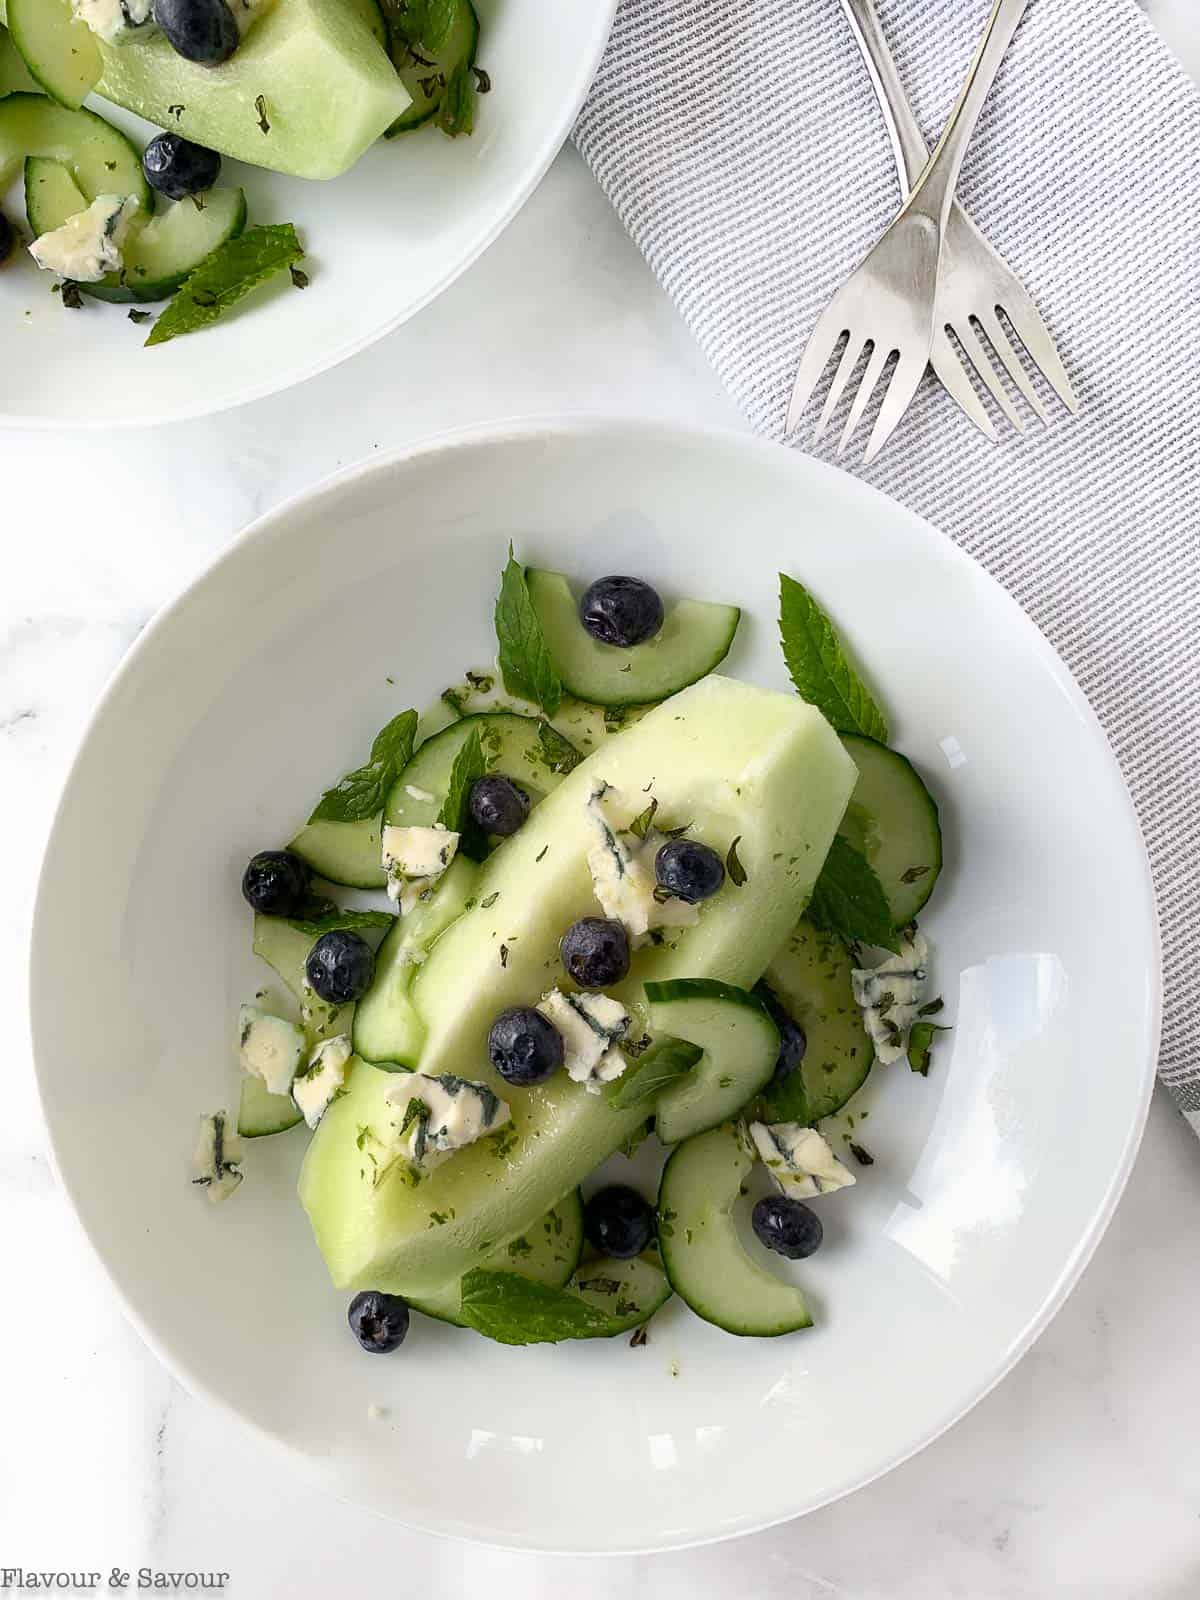 overhead view of Honeydew Melon Salad. A wedge of honeydew with blueberries, cucumbers, blue cheese and mint leaves.